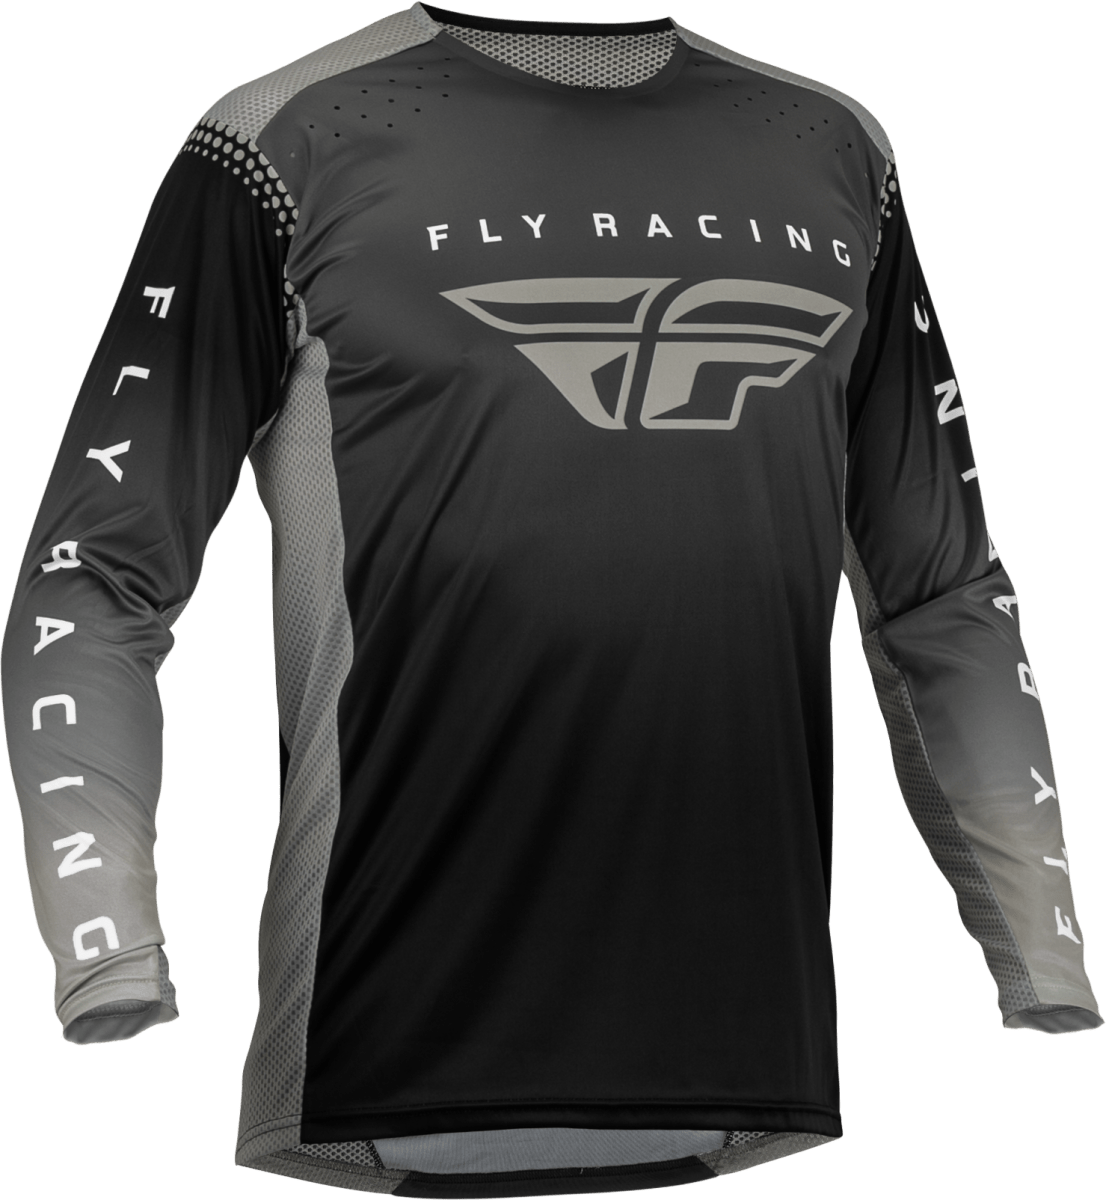 FLY RACING - YOUTH LITE JERSEY - 376-720YX - 191361346620